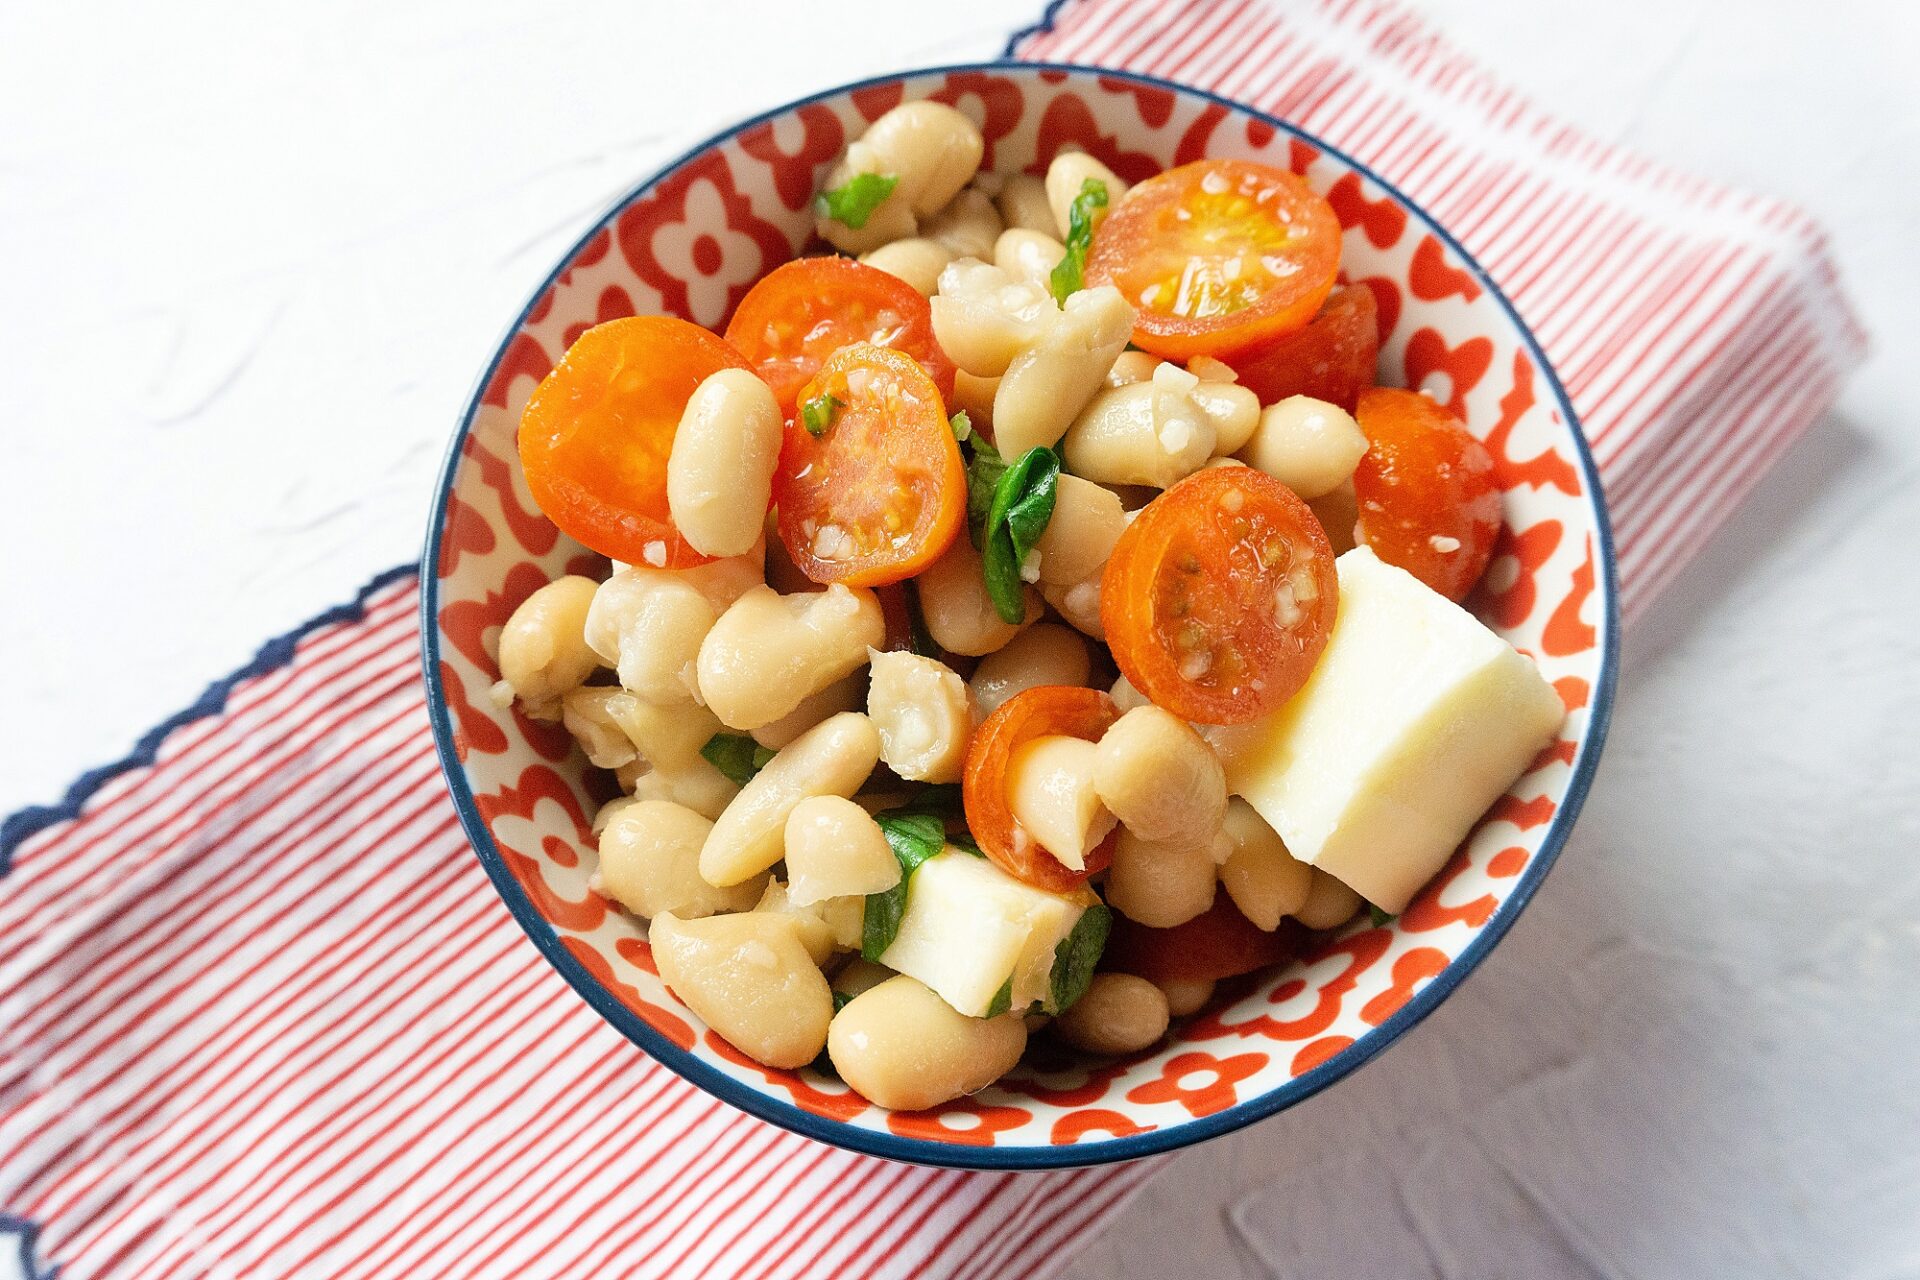 Cannellini bean salad in a bowl.